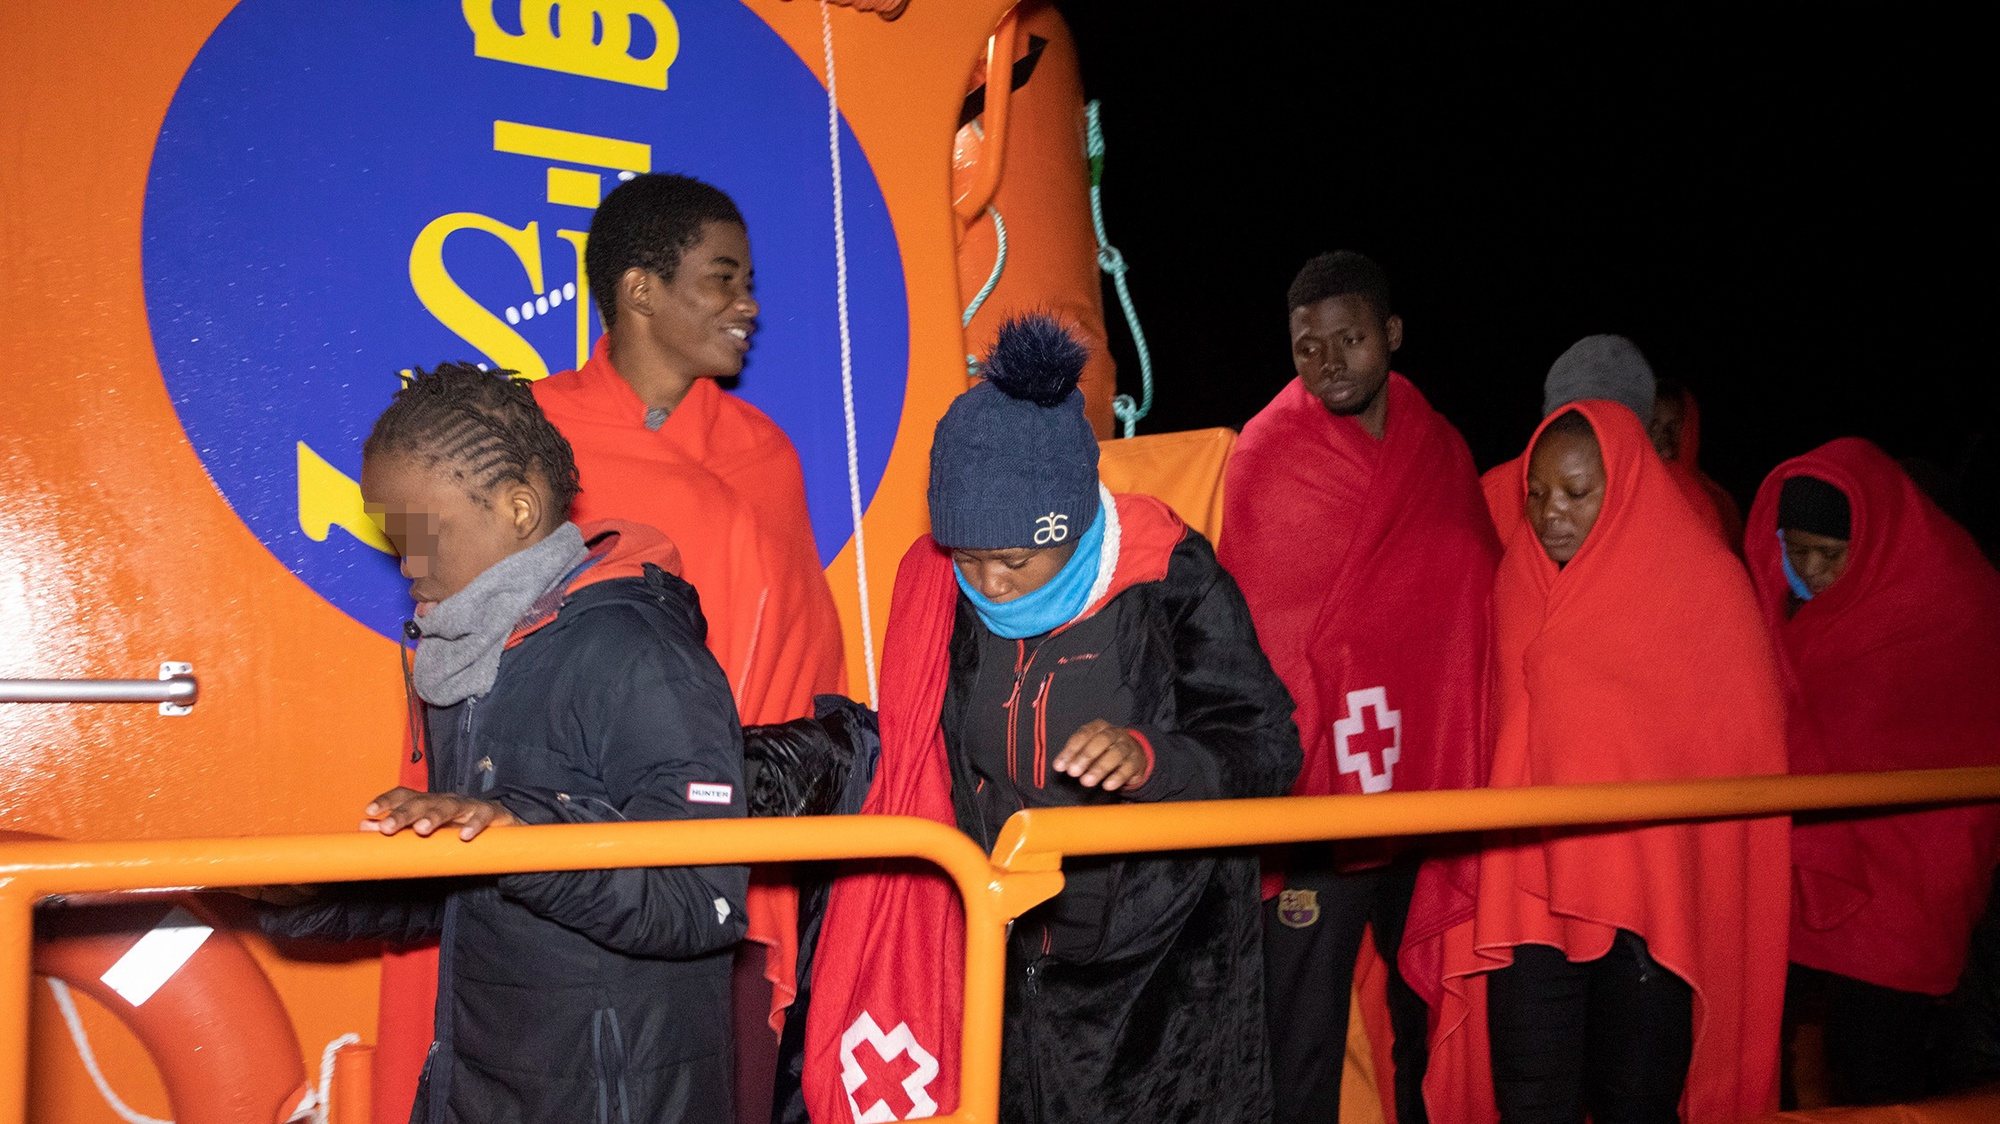 epa08921012 Some of the 44 sub-Saharan migrants disembark at their arrival at Motril&#039;s port after being rescued by Spanish Maritime Safety and Rescue Society when they traveled on board a small boat, in Granada, Spain, 05 January 2020.  EPA/Miguel Paquet